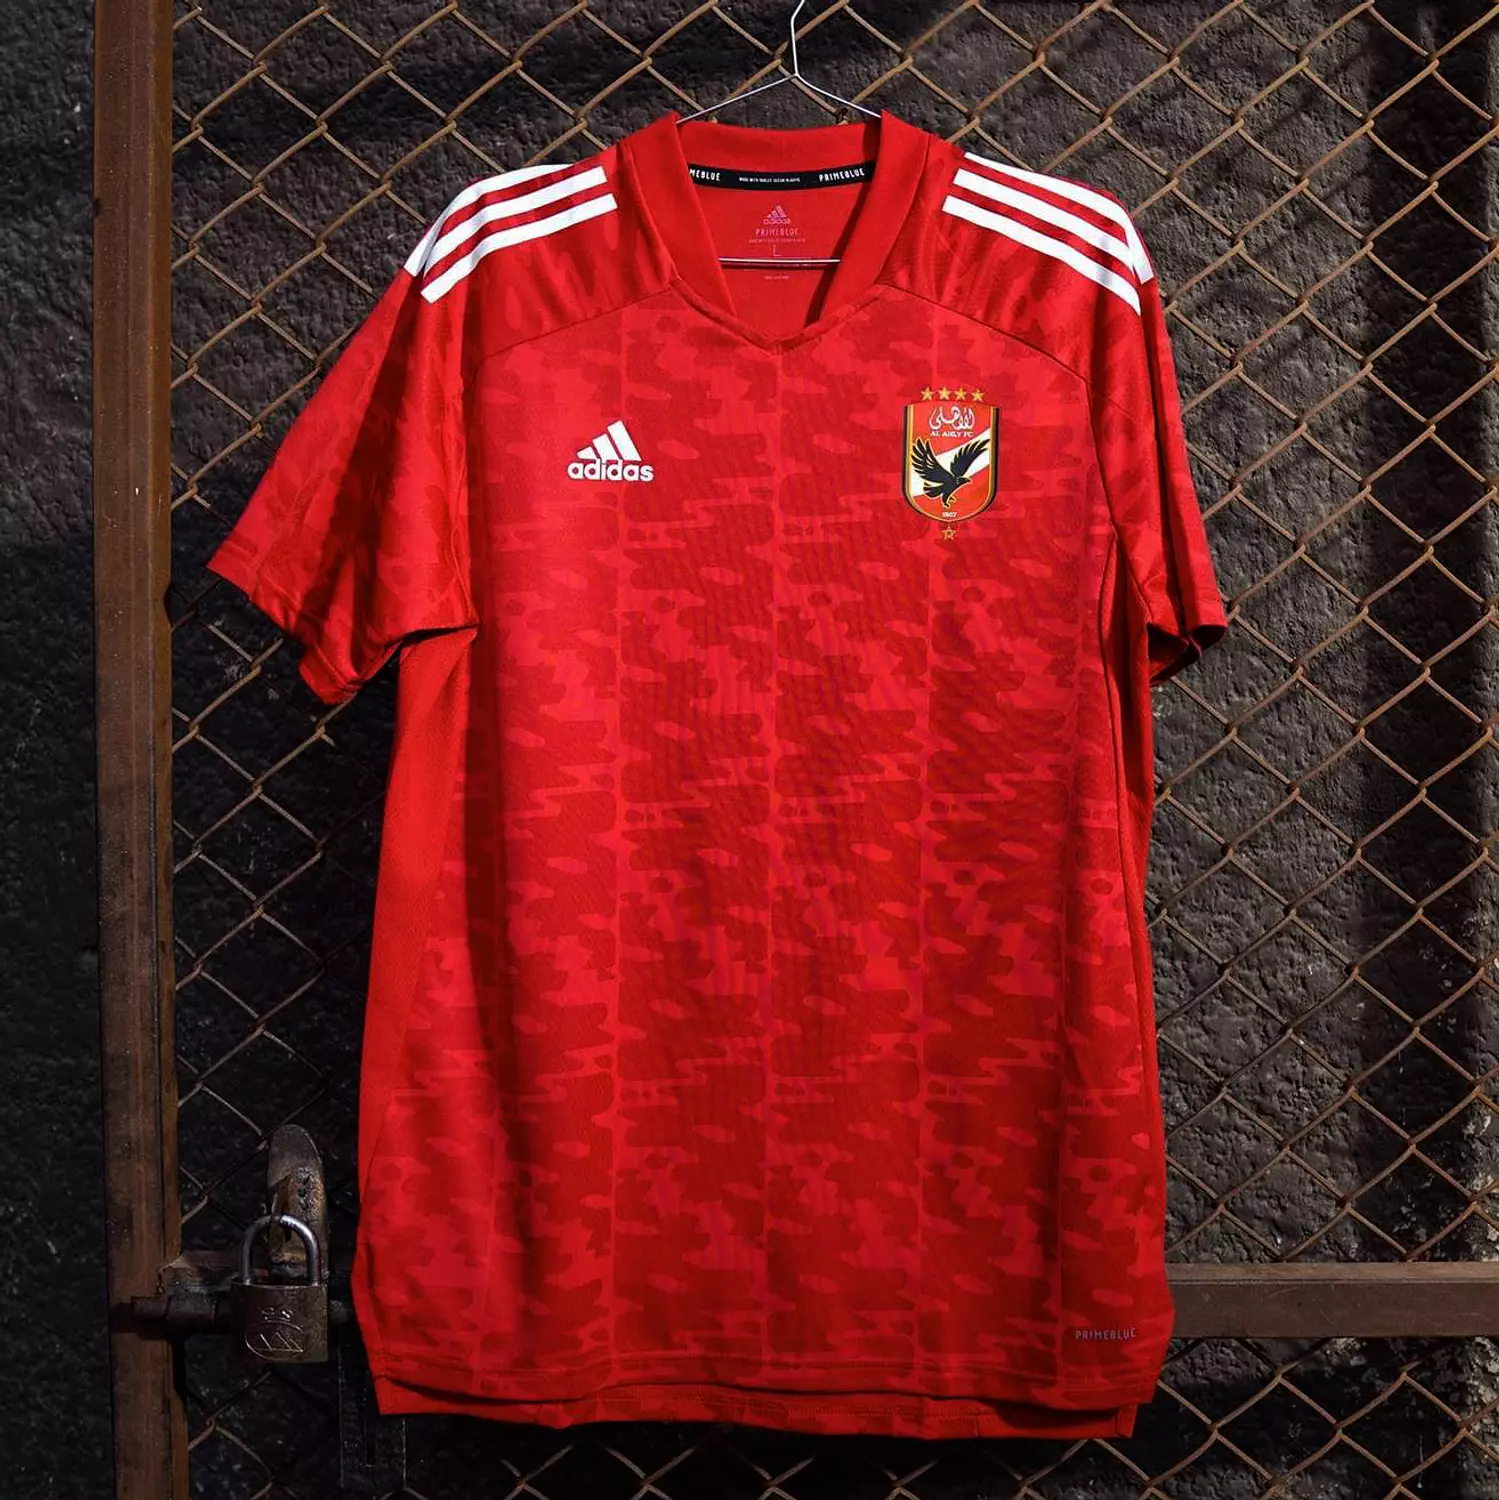 AL AHLY 22/23 hover image